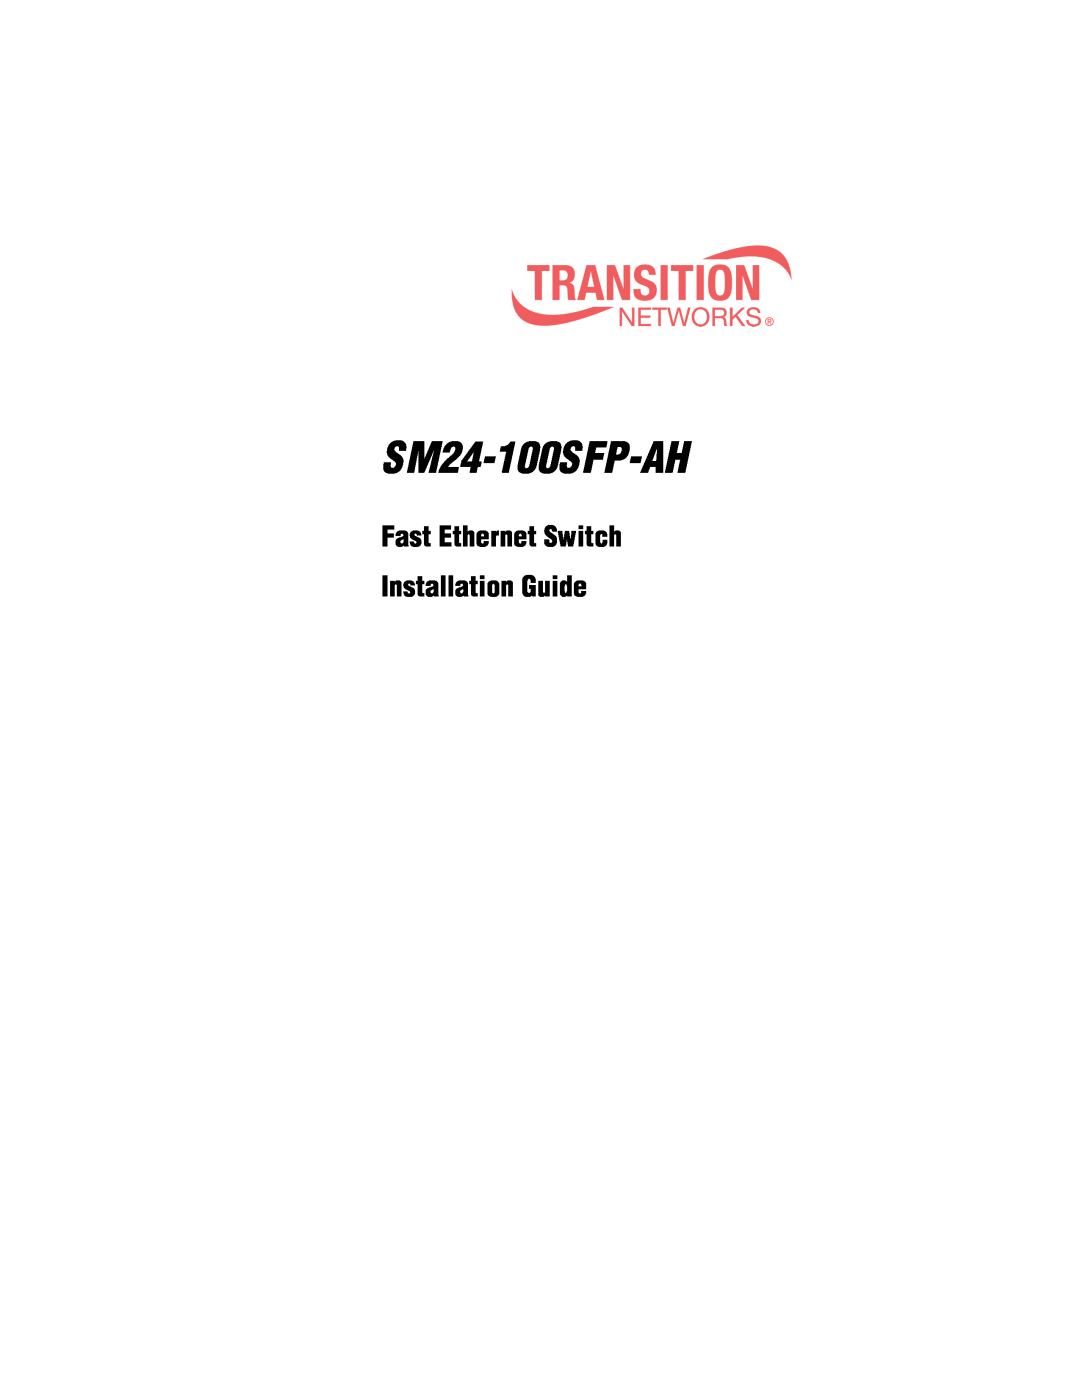 Transition Networks SM24-100SFP-AH manual Fast Ethernet Switch Installation Guide 